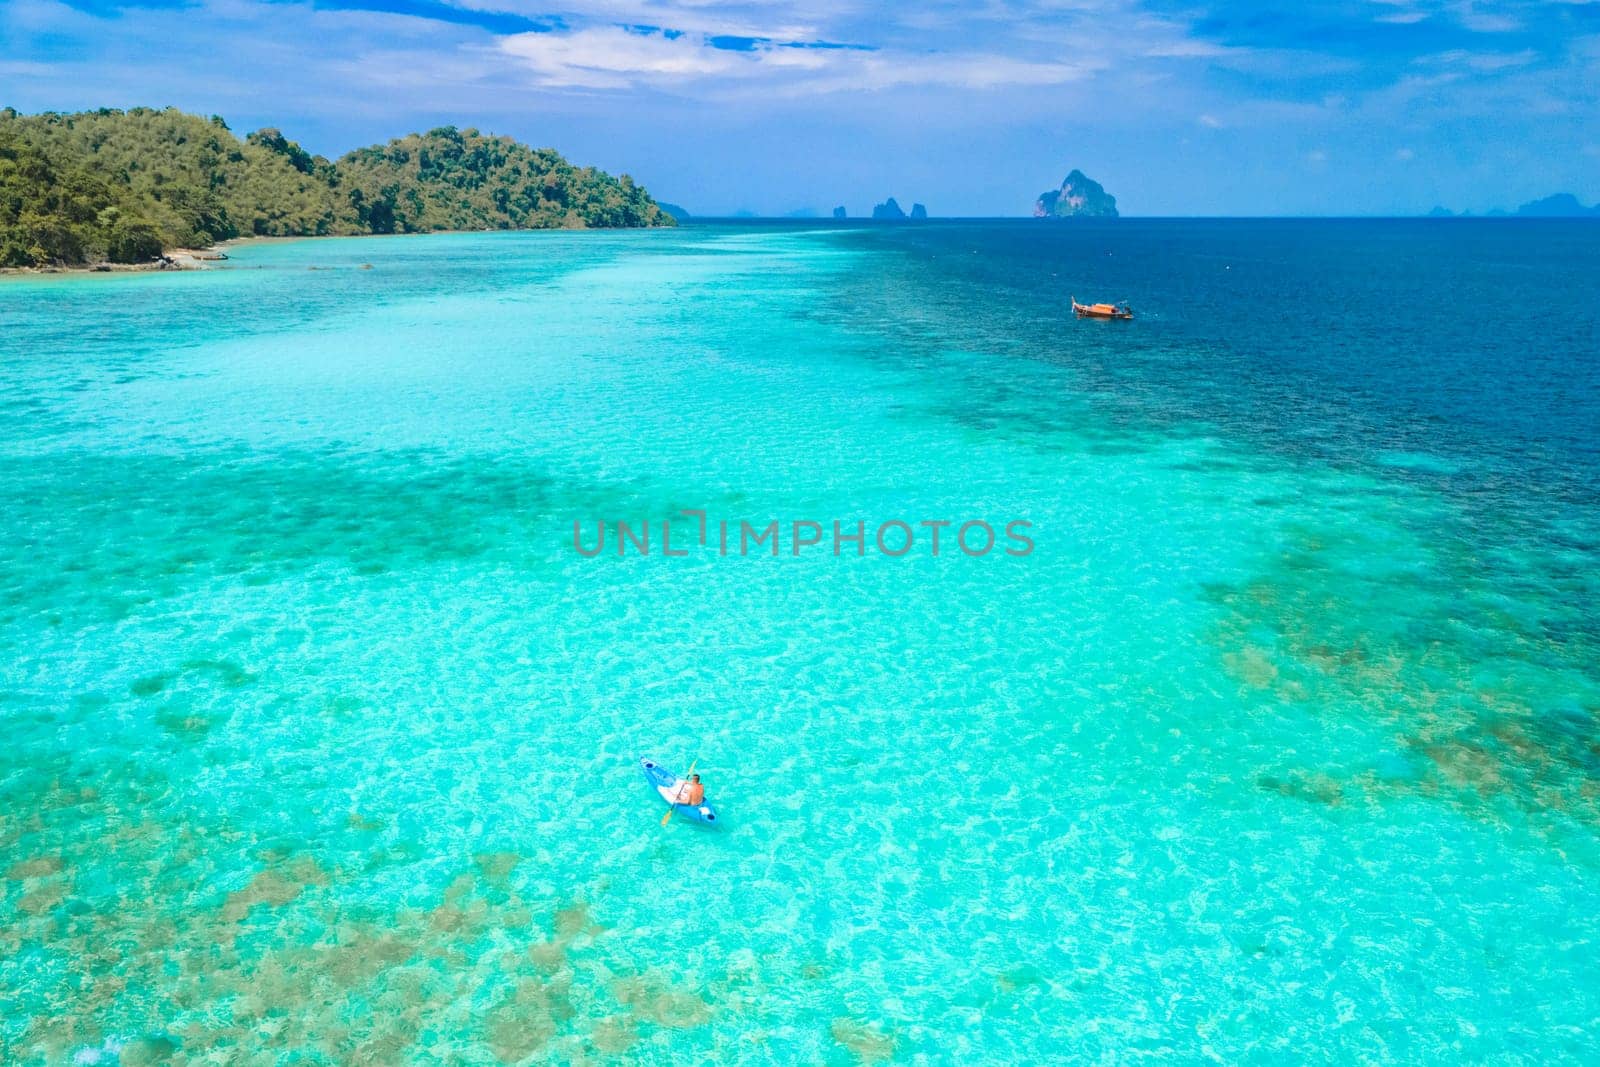 Young man in a kayak at the bleu turqouse colored ocean of Koh Kradan a tropical island with a coral reef in the ocean, Koh Kradan Trang Thailand